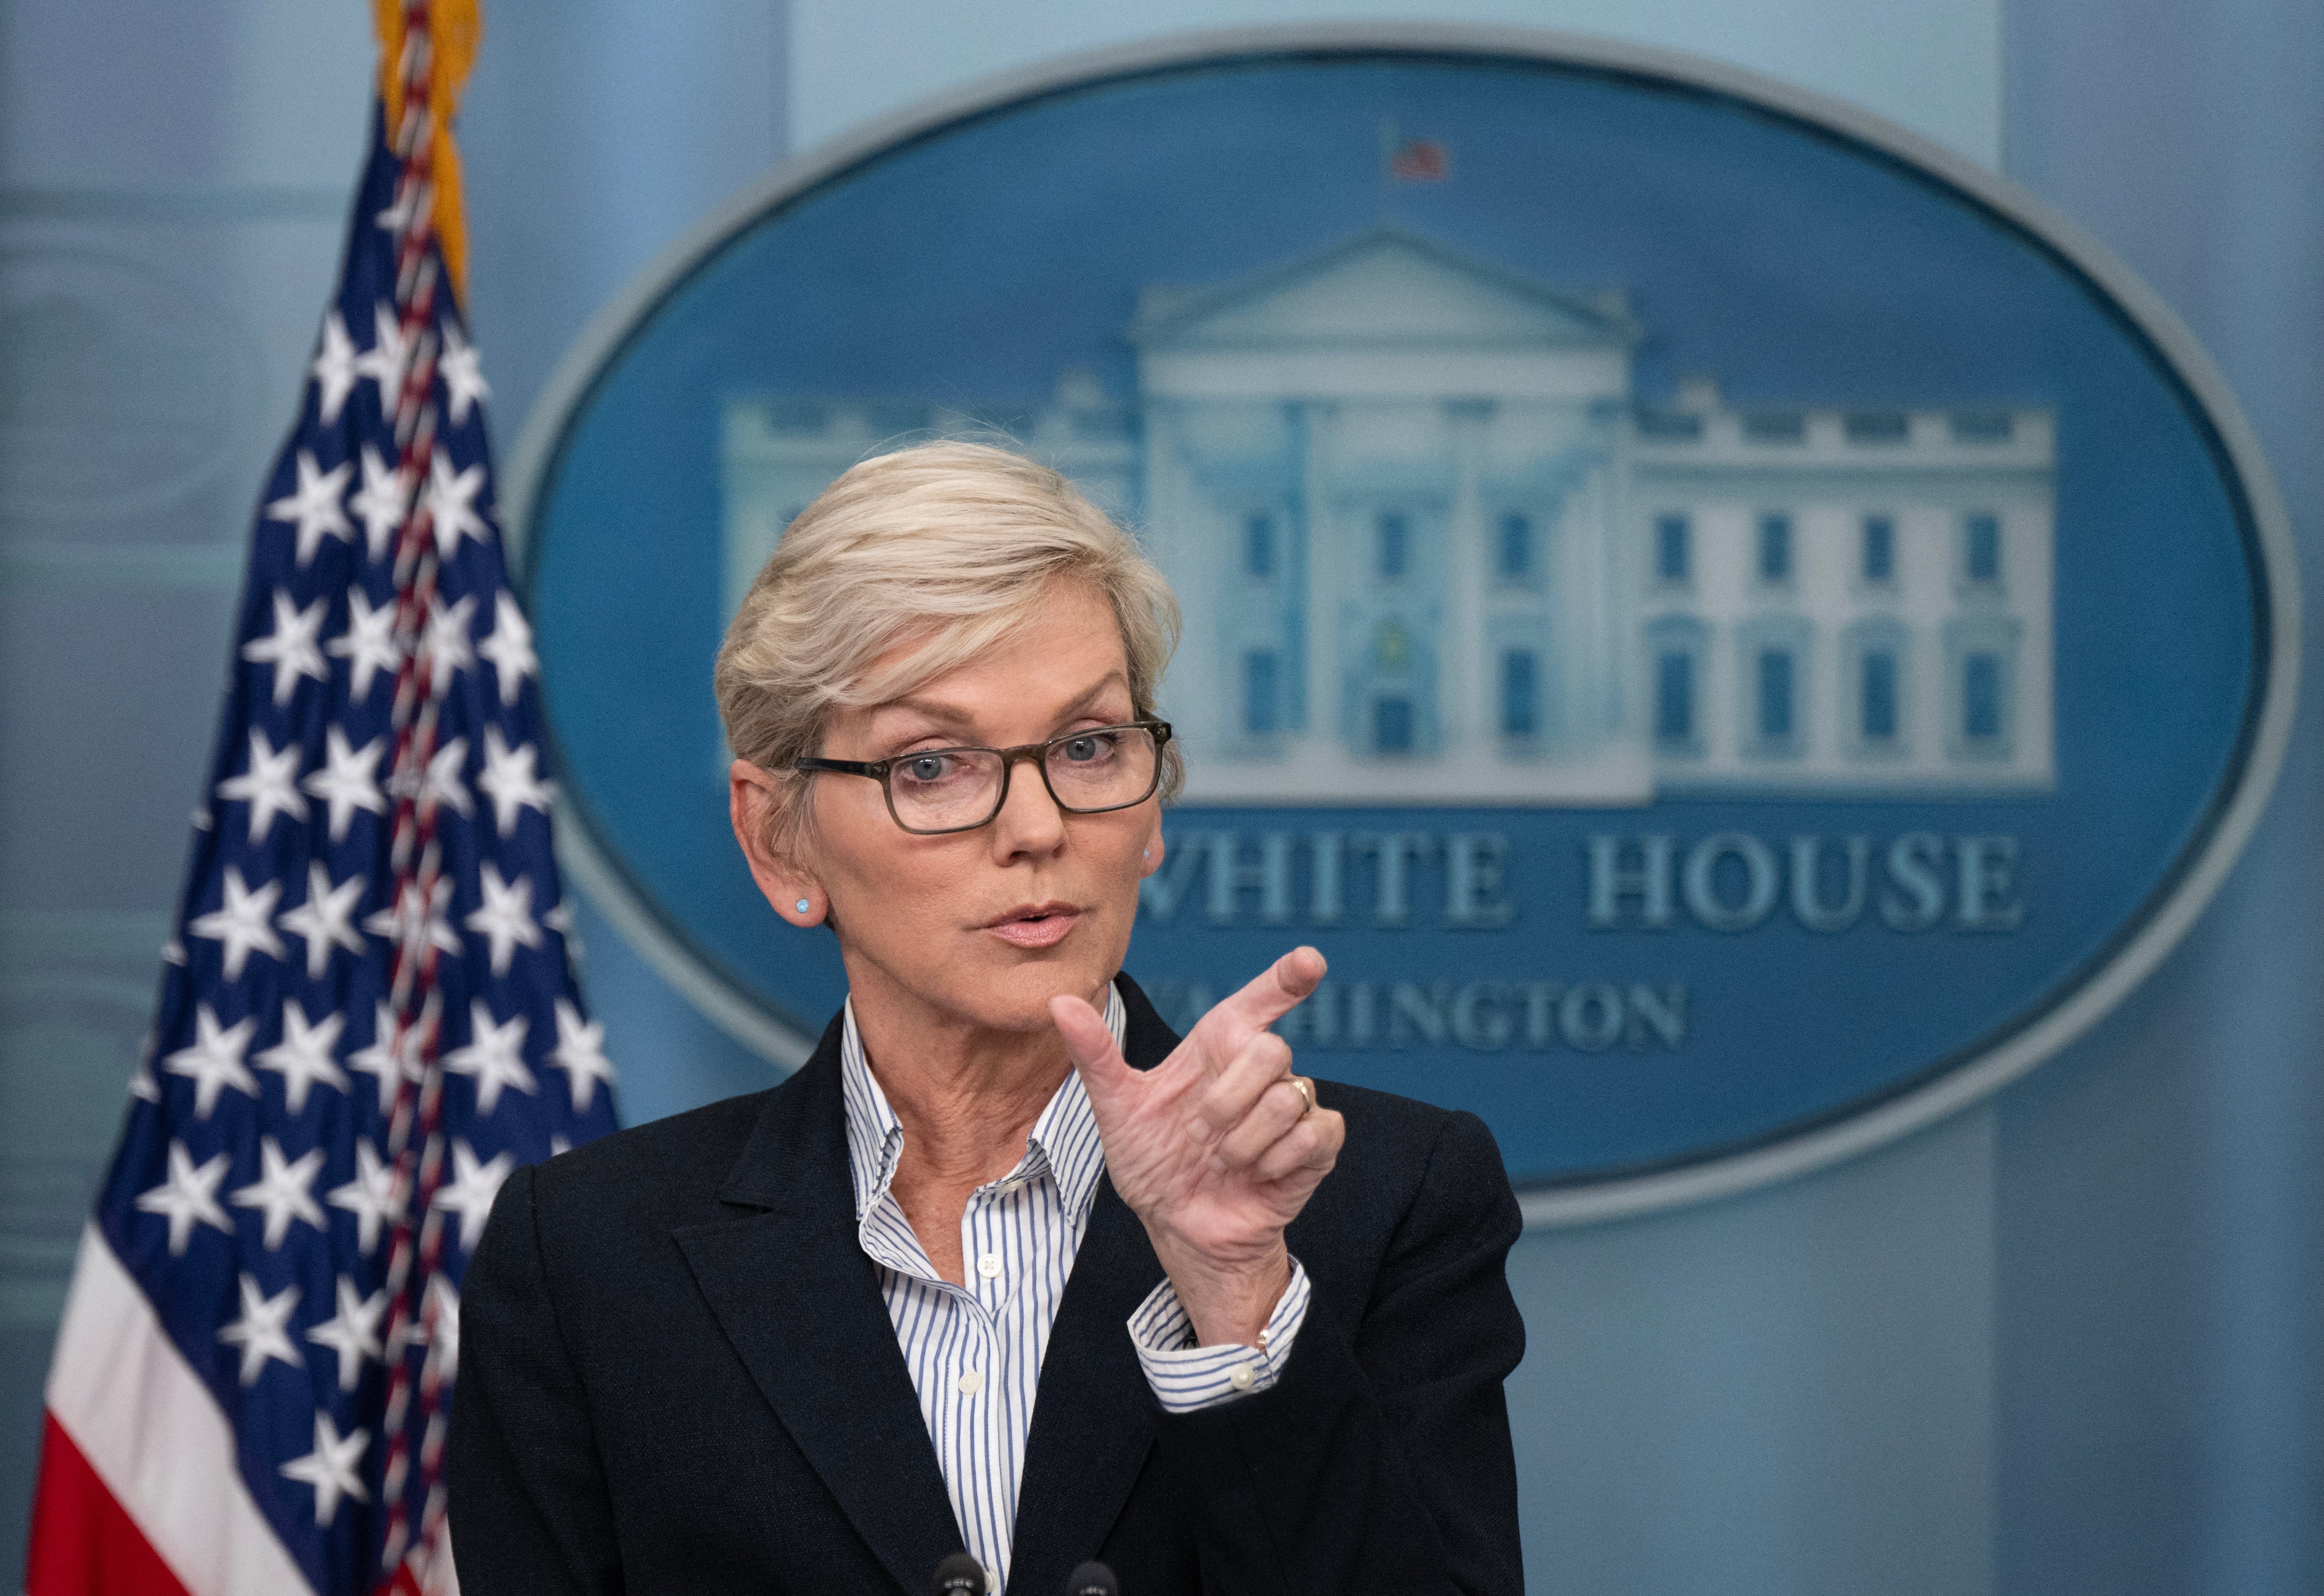 Energy Secretary Jennifer Granholm speaking in front of White House signage and Amercan Flag sizing with fingers.